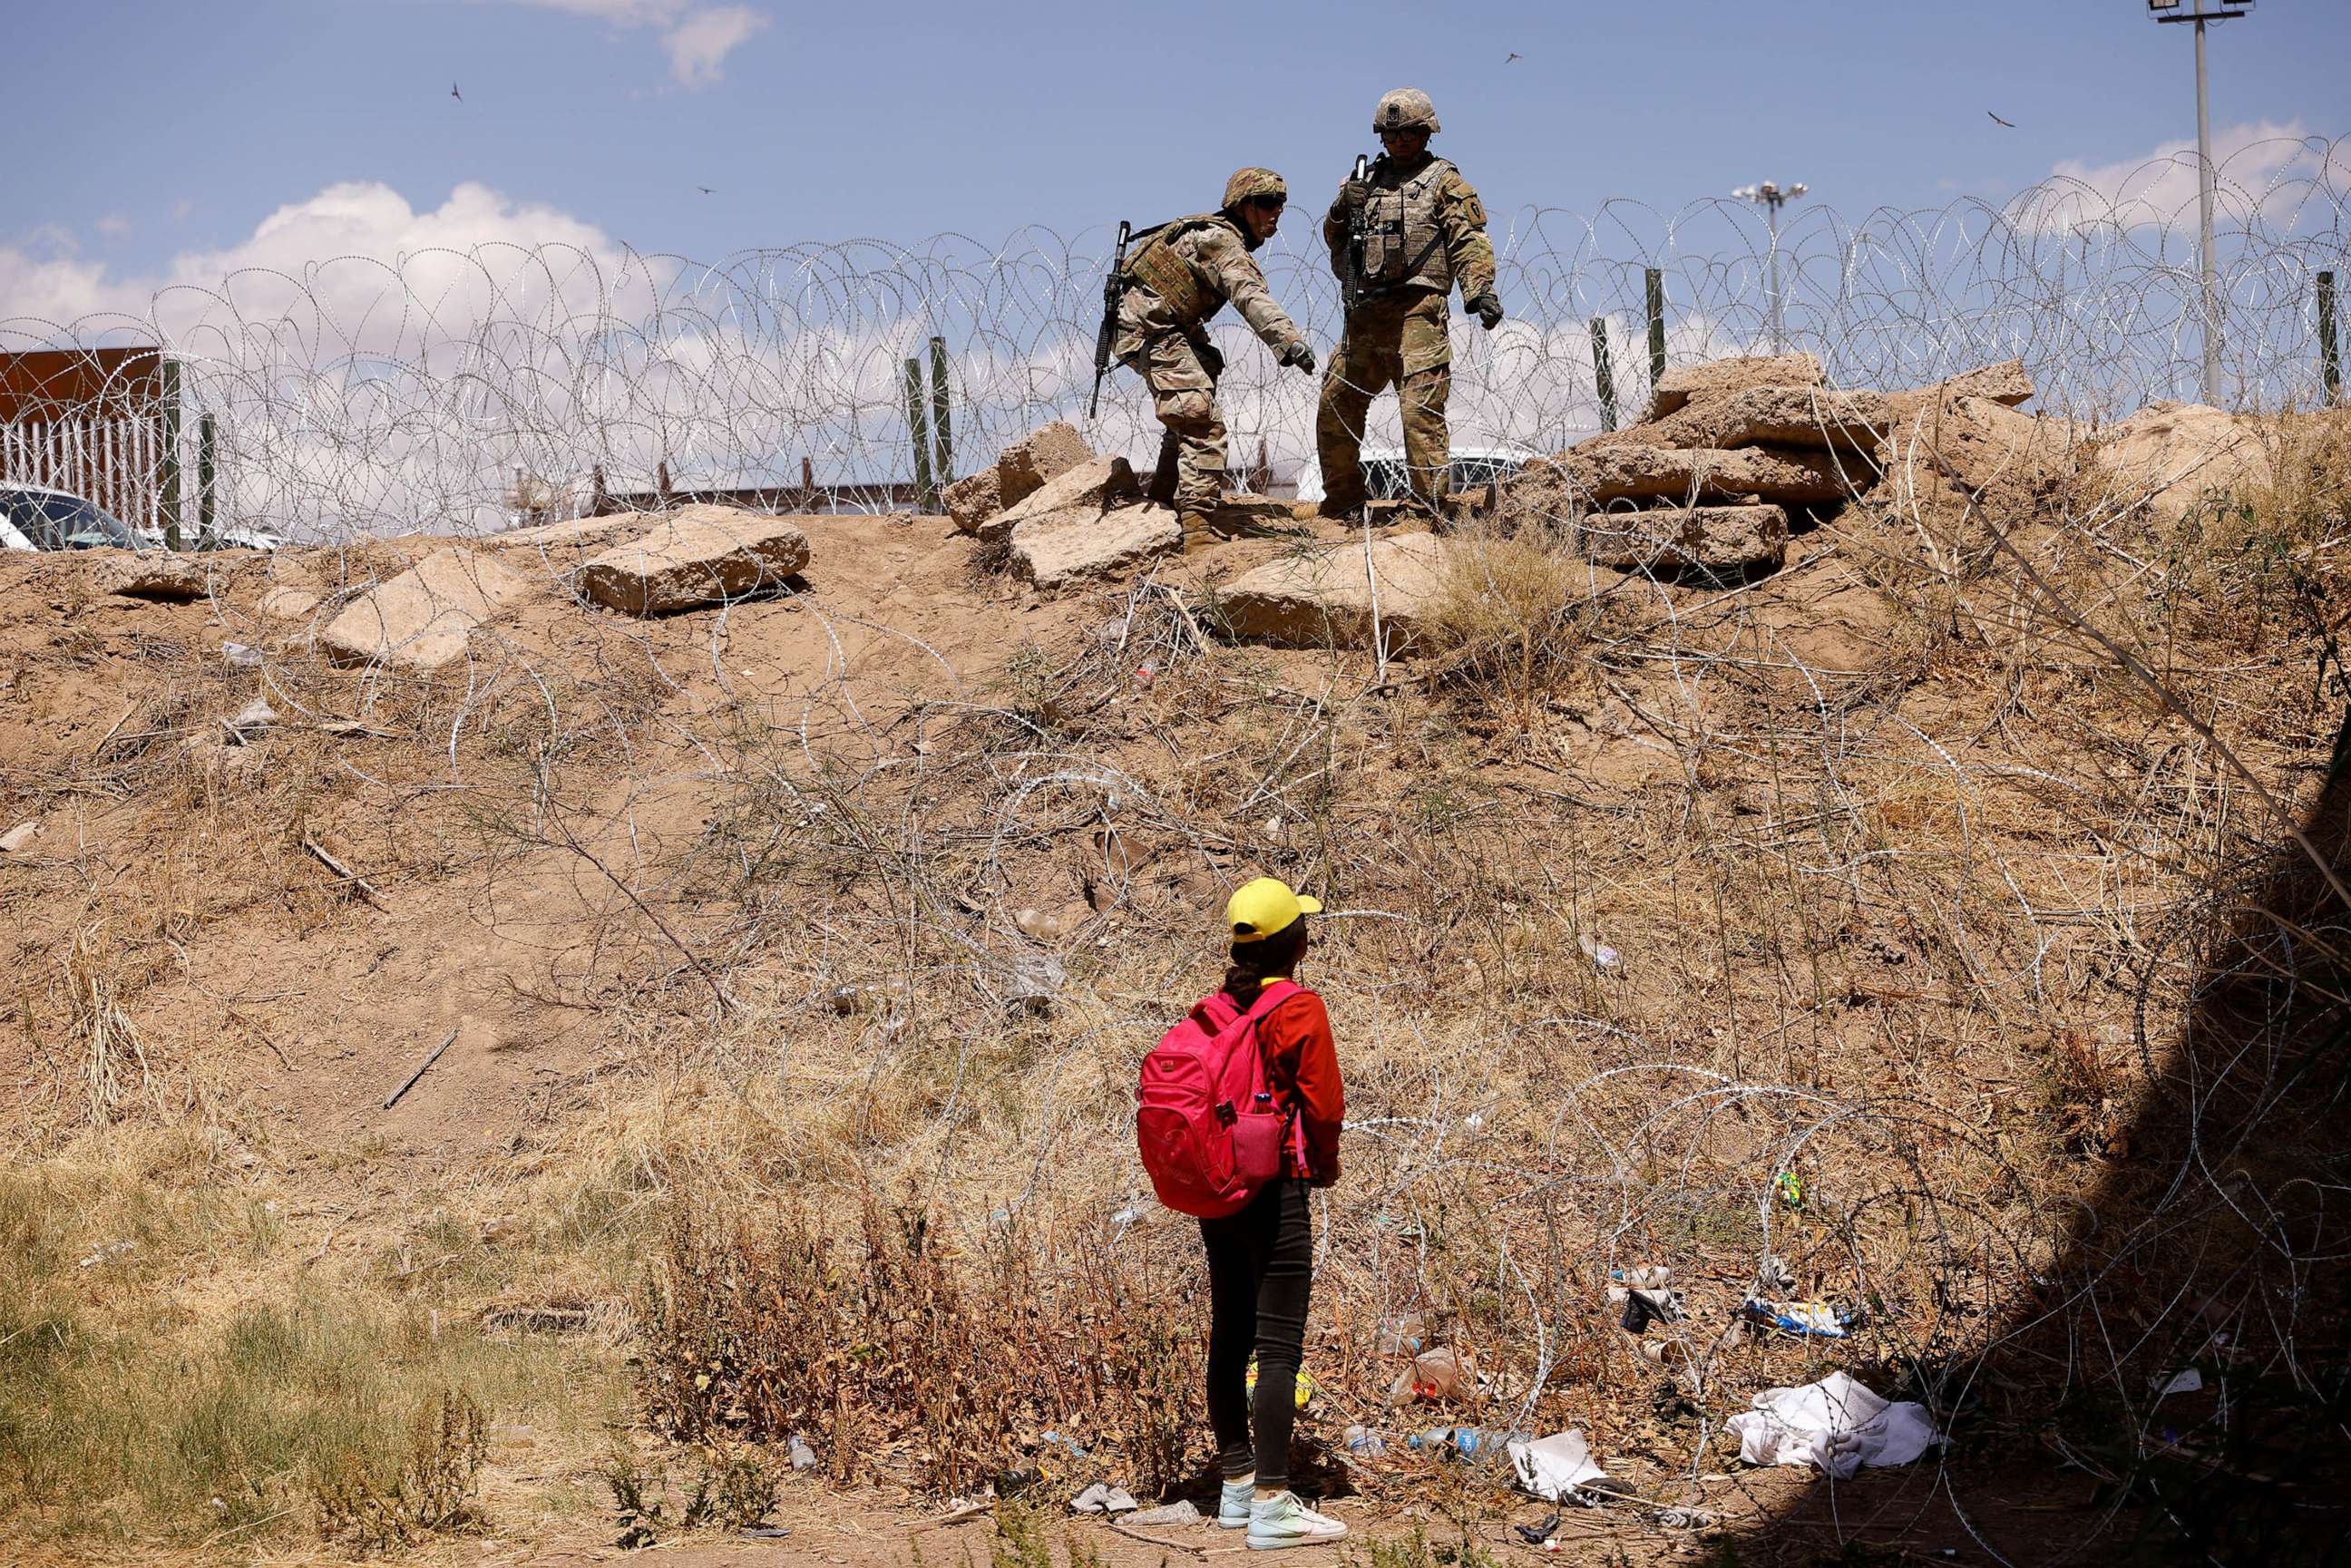 PHOTO: FILE - A young migrant, traveling alone from Guatemala, stands near the Rio Bravo river after crossing the border, to request asylum in the United States, as members of the Texas Army National Guard extend razor wire to inhibit migrants crossing